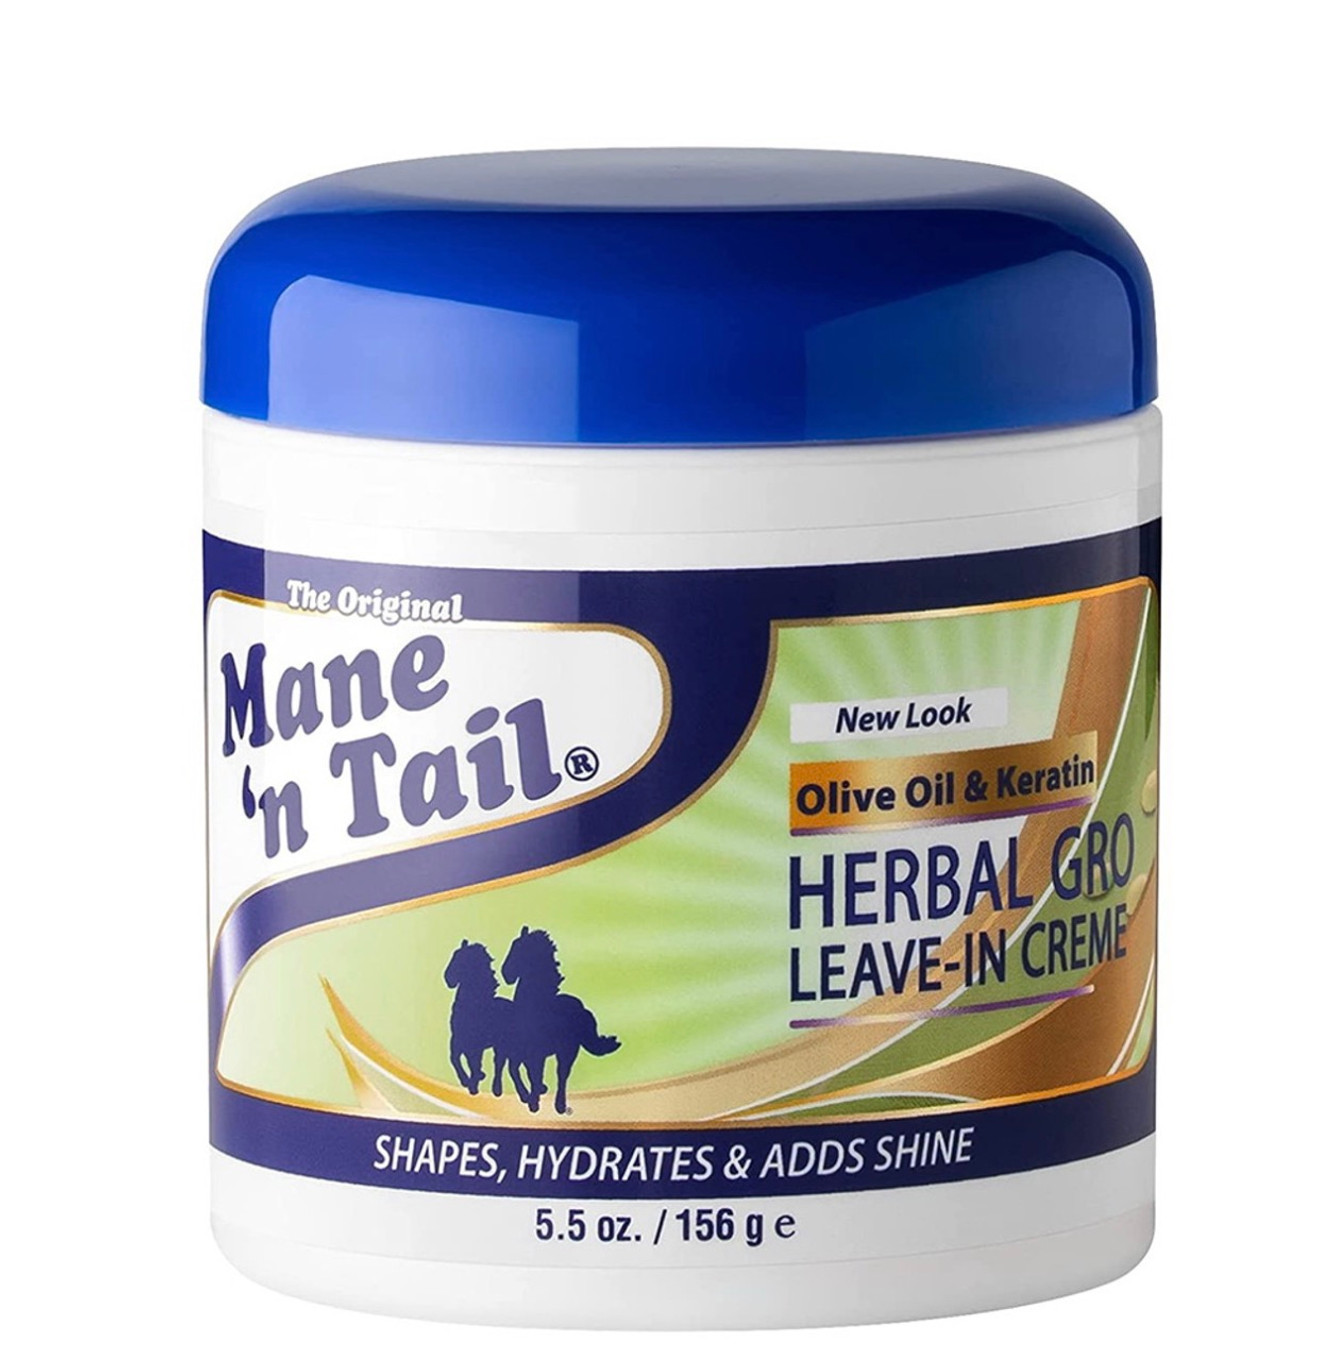 MANE 'N TAIL Herbal Gro Leave-In Creme Therapy (5.5 oz)